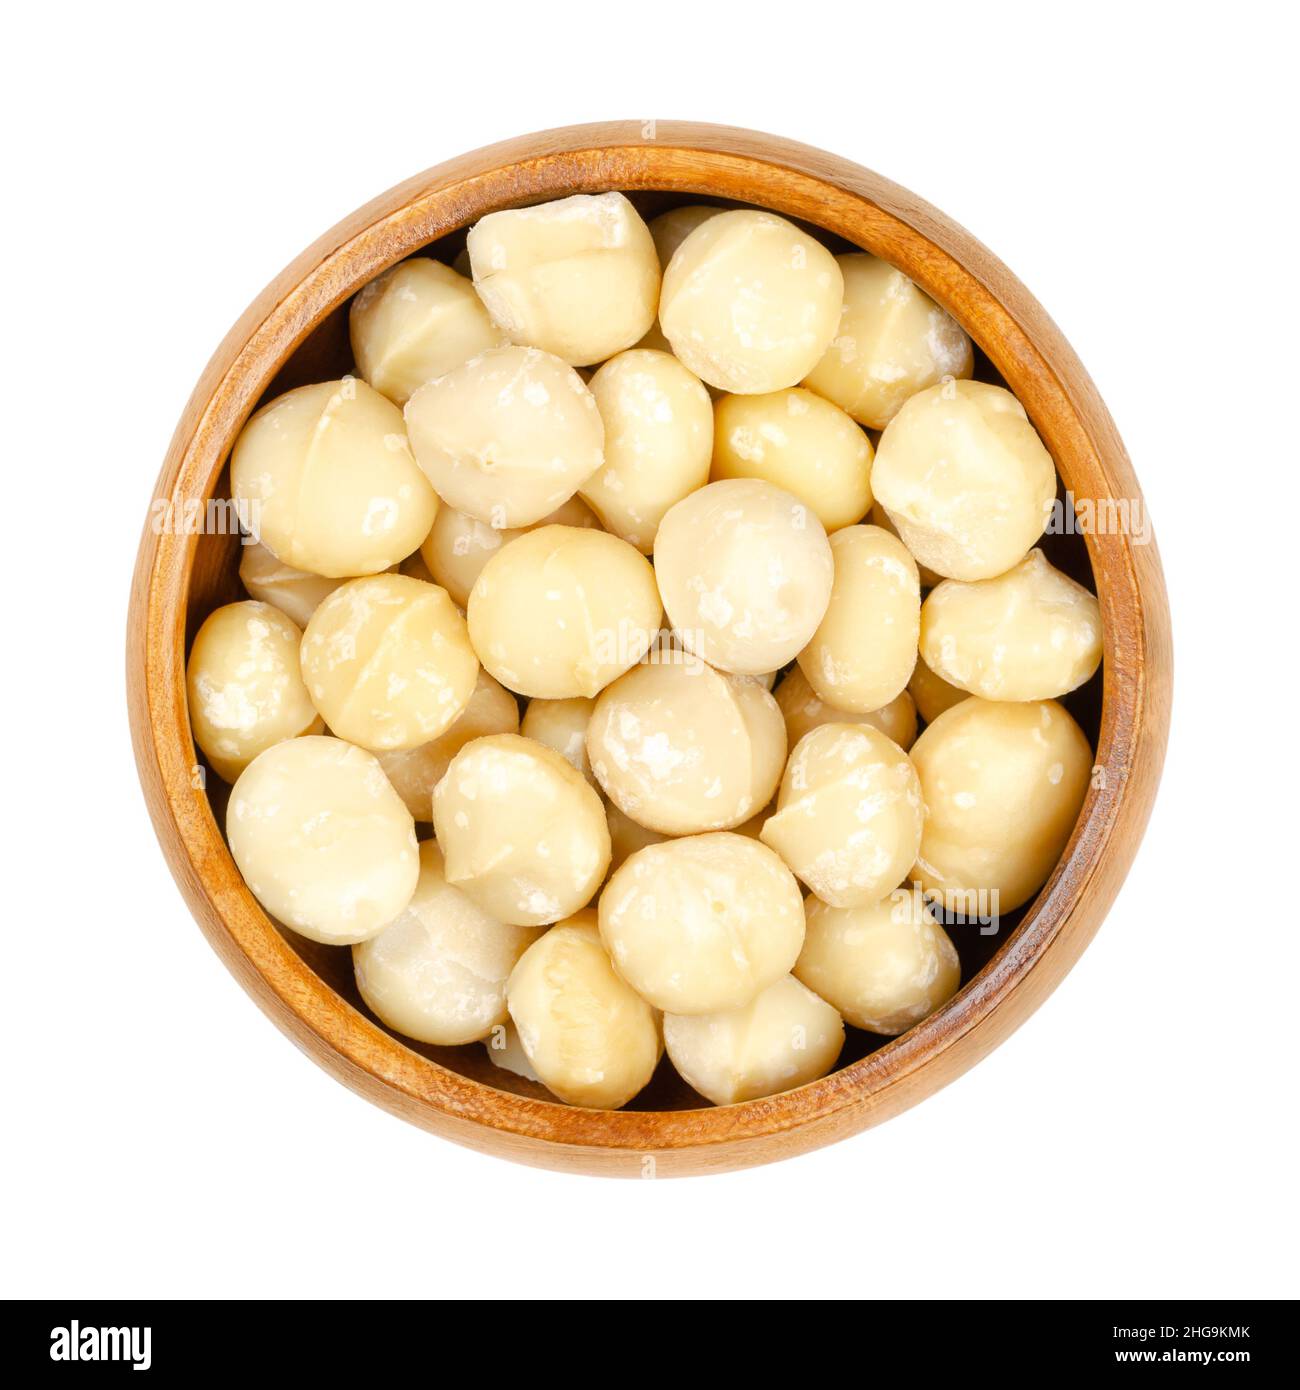 Shelled and dried macadamia nuts, in a wooden bowl. Also called Queensland, bush, maroochi, bauple or Hawaii nut. Wholesome snack. Stock Photo